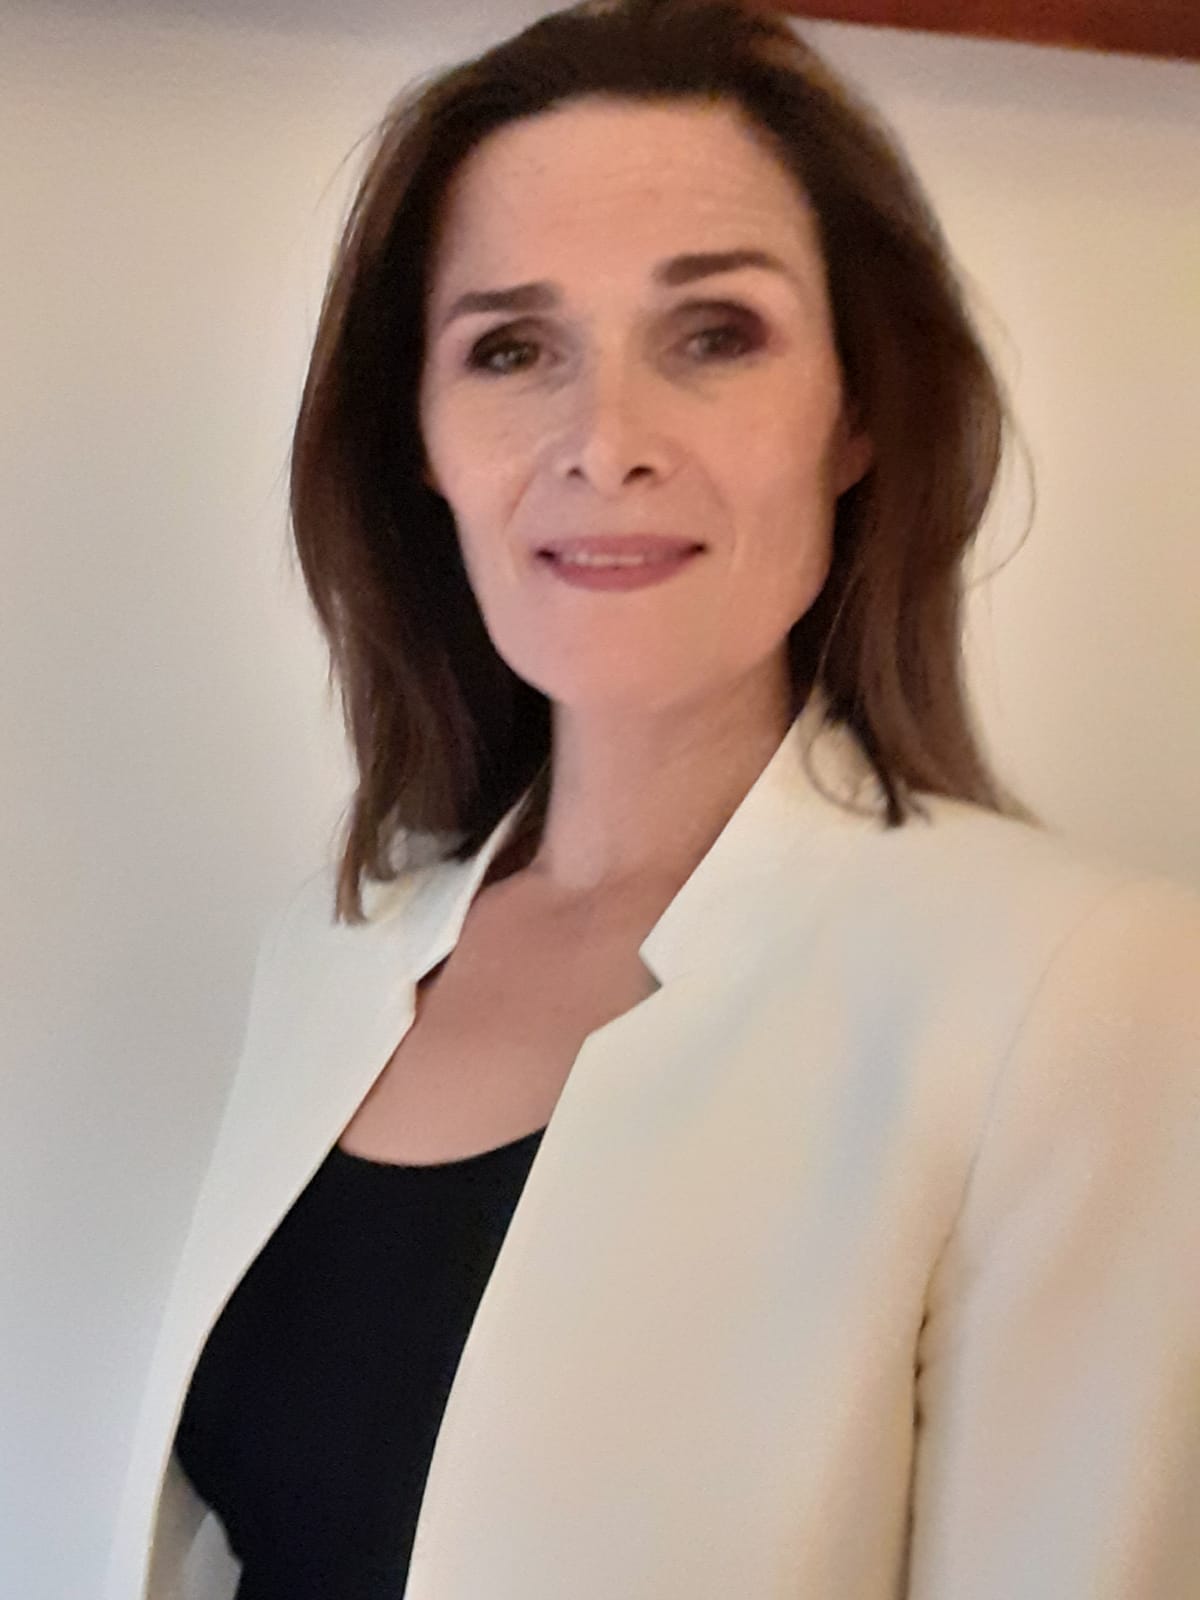 PBJ Learning Advisory Board Member Theresa Ryan-Rouger is an experienced human rights lawyer, lecturer, published researcher, and development project leader with expertise in International Human Rights: Children's rights, SASE, Human Trafficking, Business and Human Rights